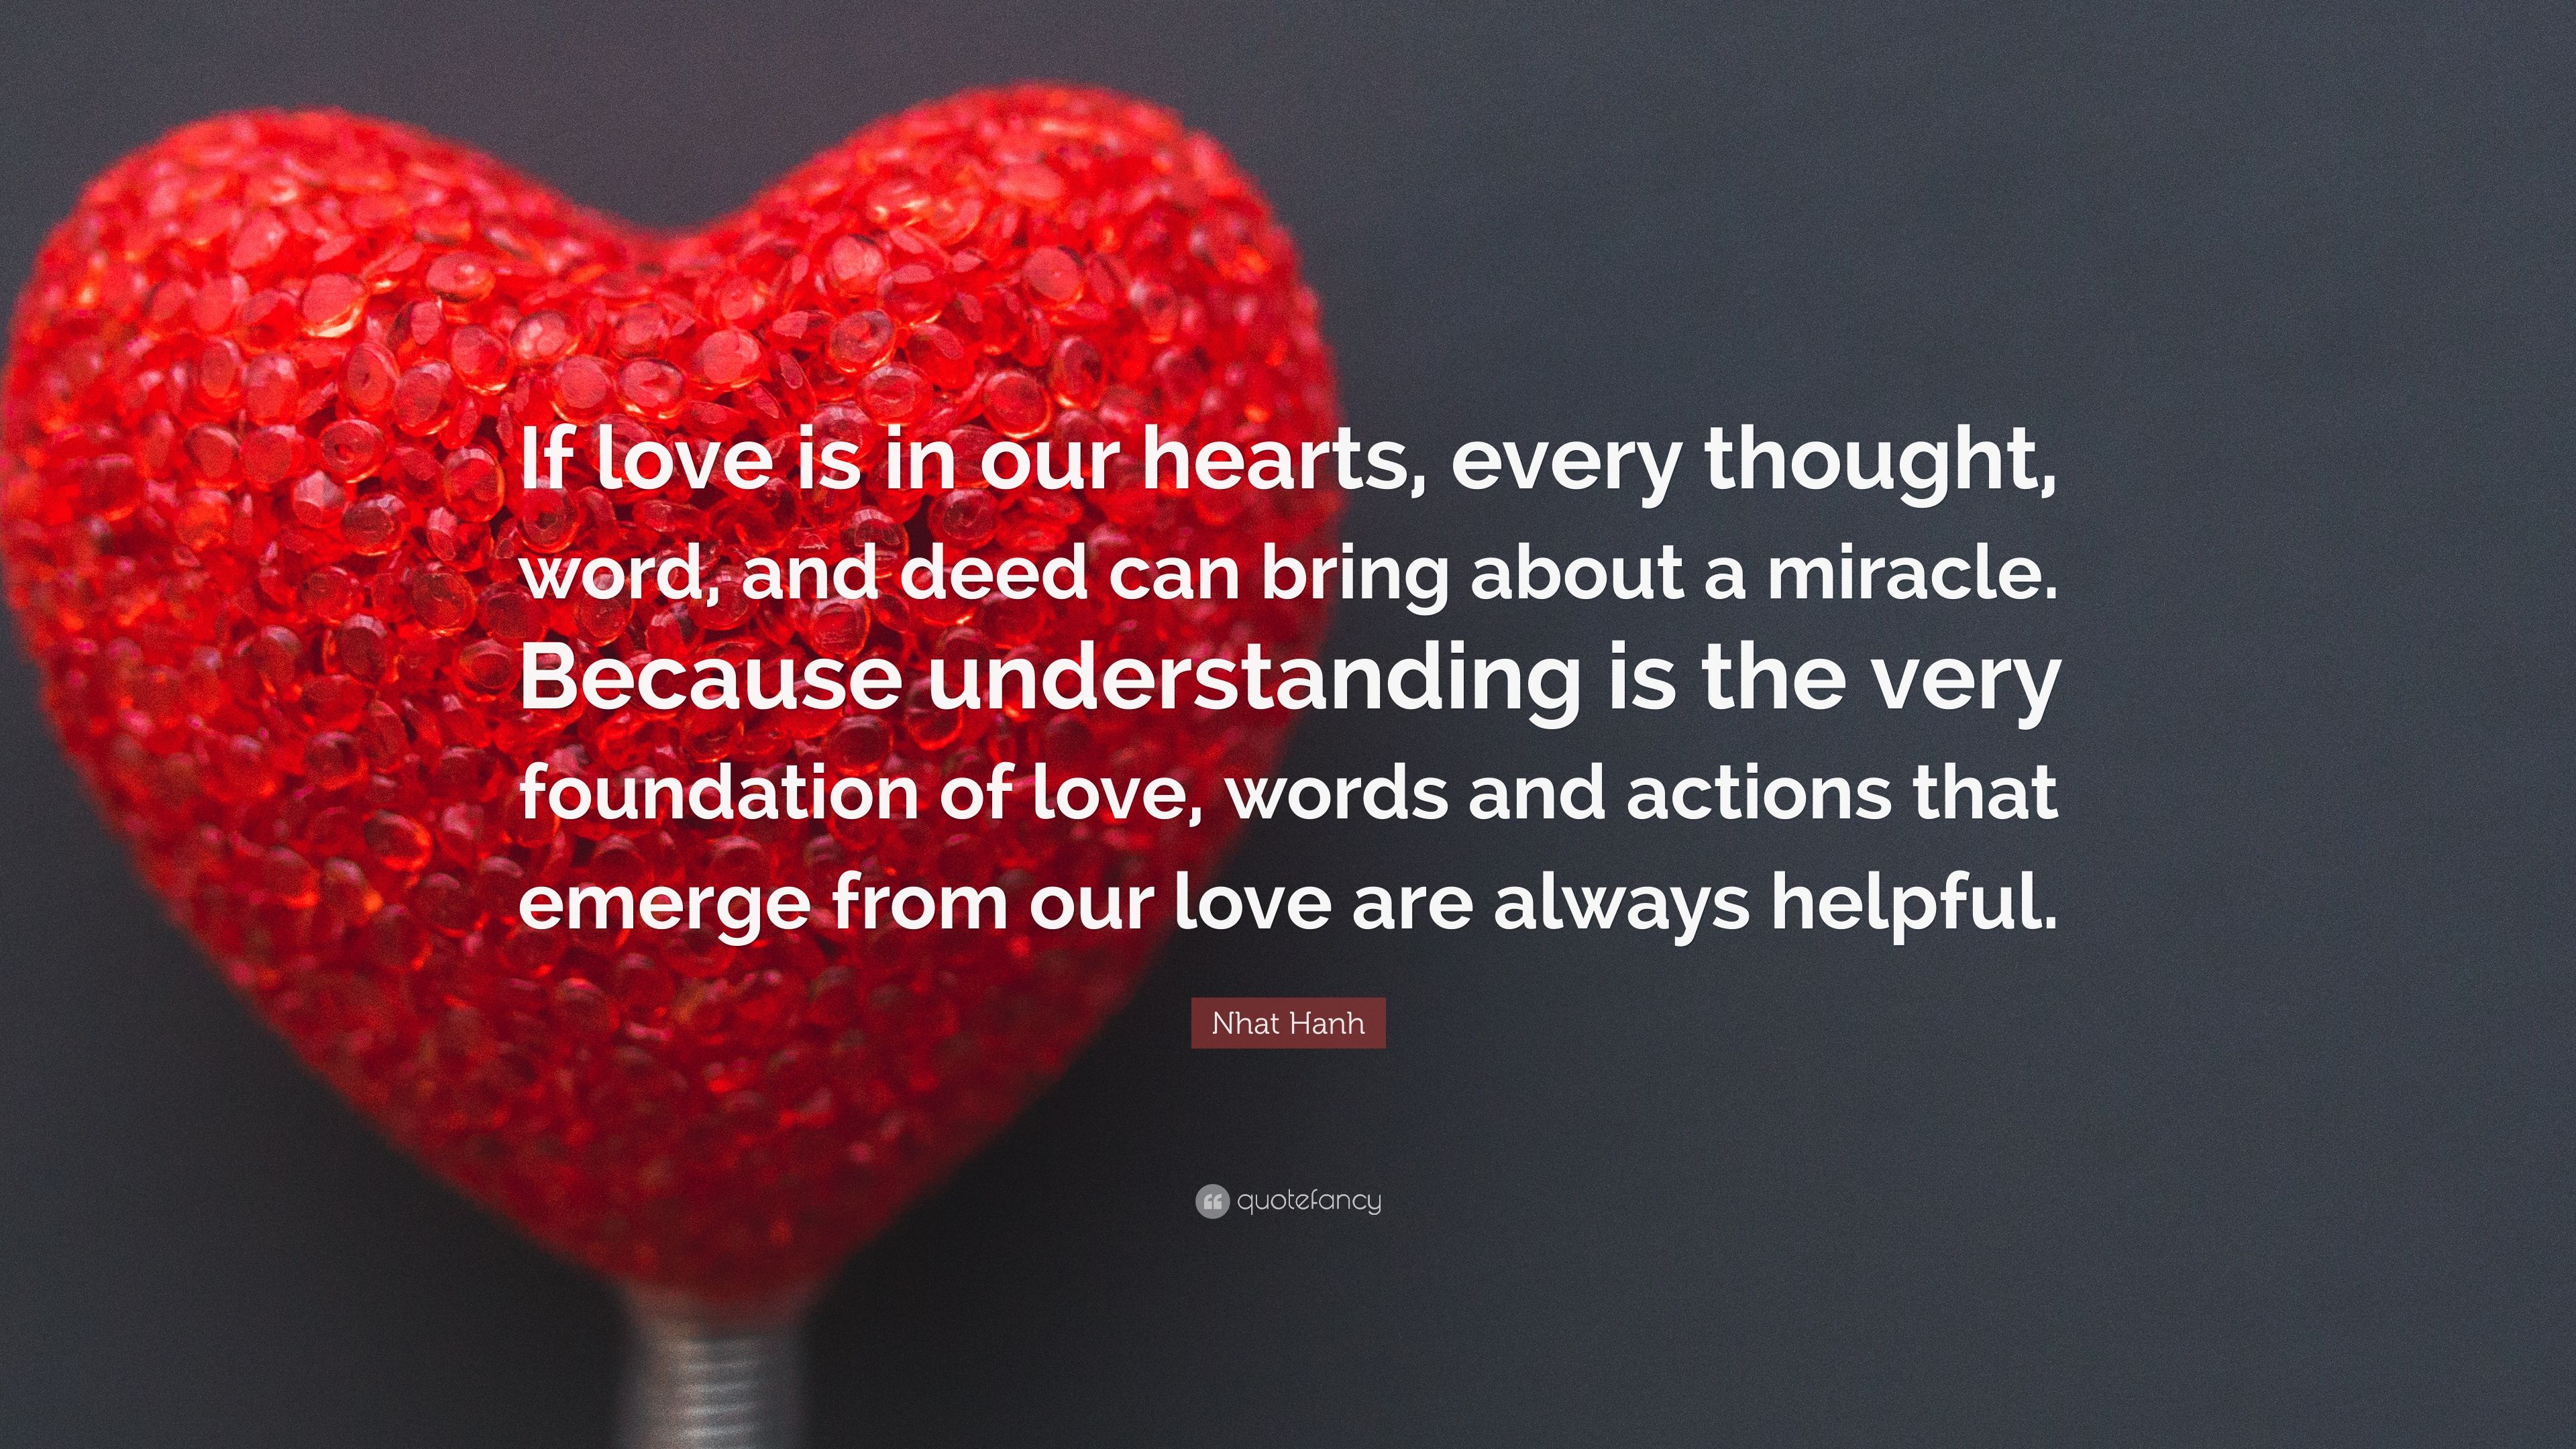 Nhat Hanh Quote: “If love is in our hearts, every thought, word